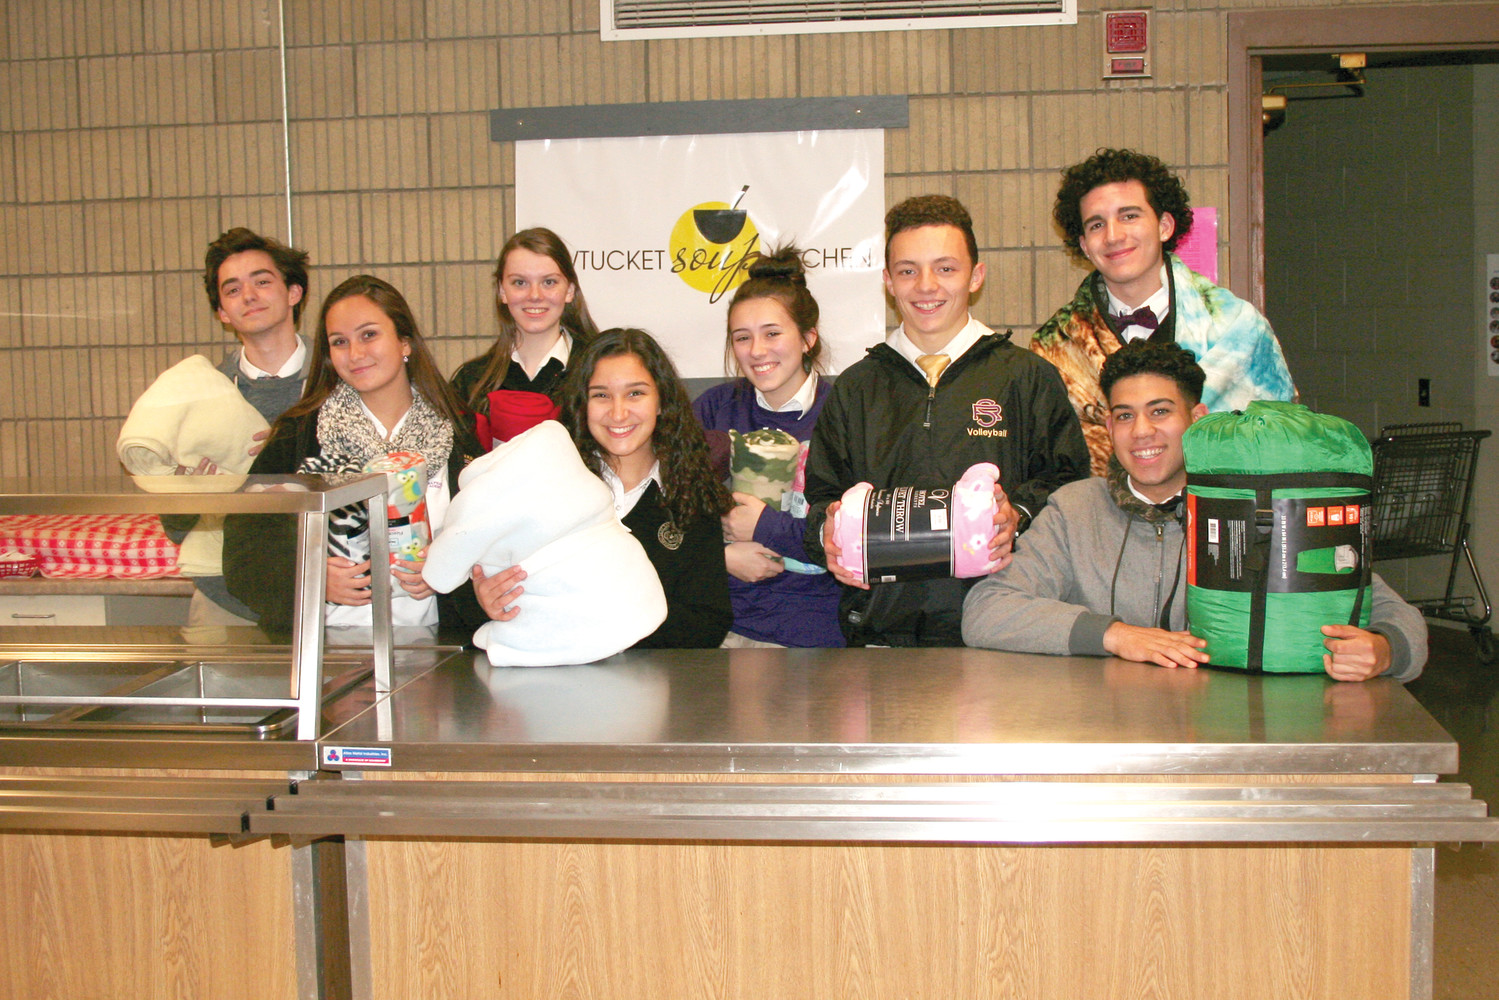 Pictured, from left to right, Kaylem Pereira, Gianna Medeiros, Anna-Marie Ferris, Theresa Wagner, Emily Gaboriault, Eric Martineau, Billy Baxter-Lima and Kelvin Torres, seated right.